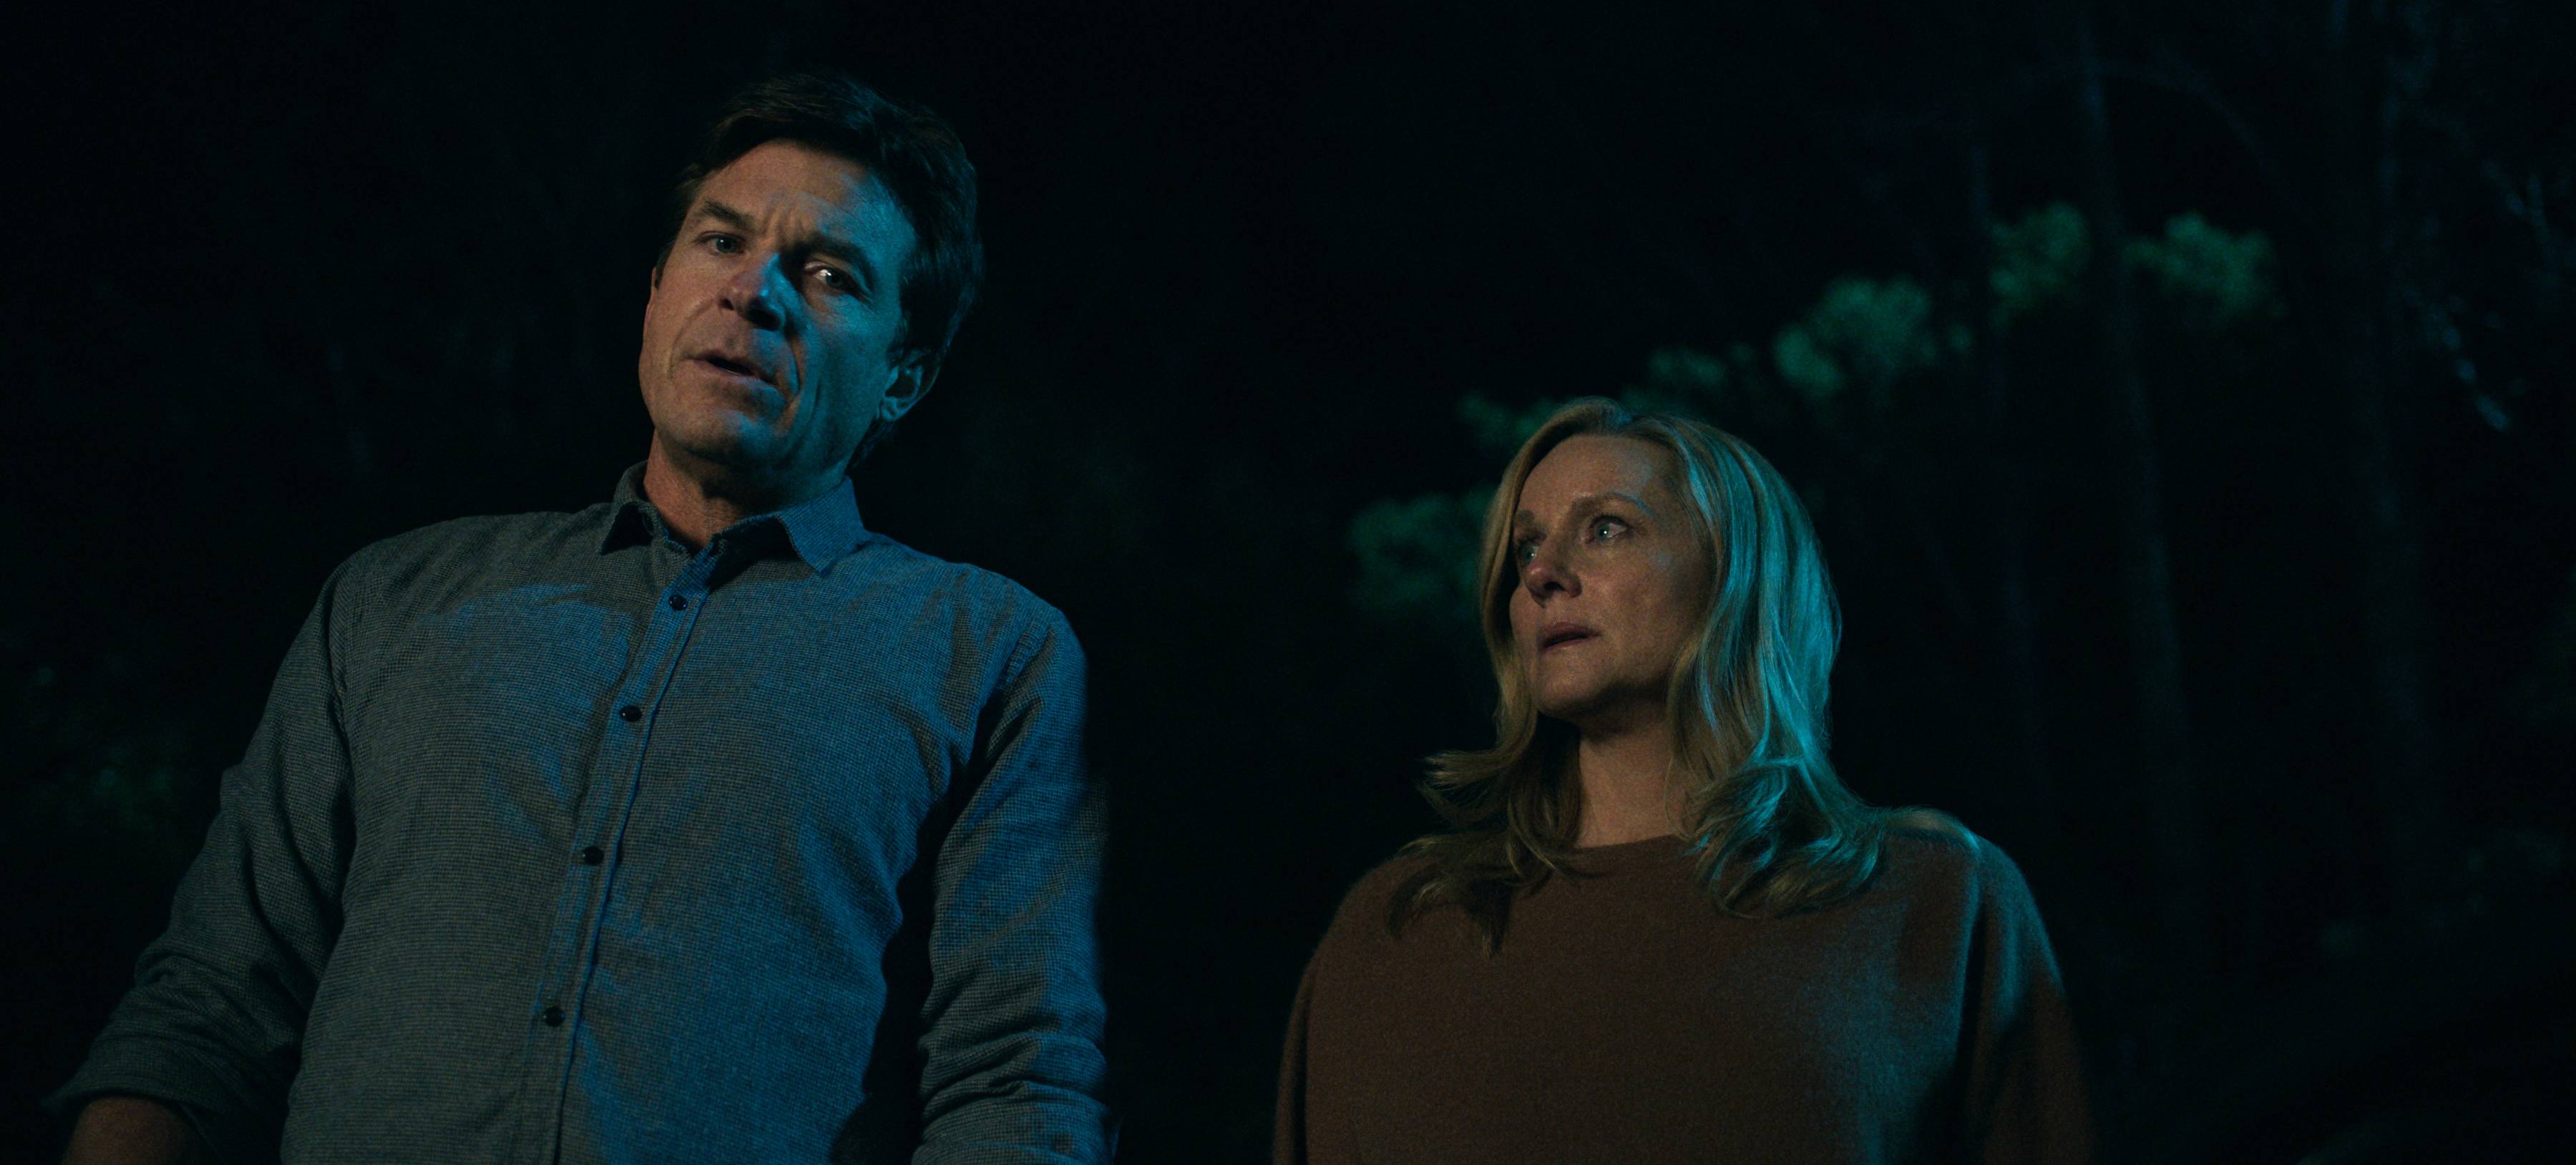 Ozark Season 4 Trailer and Images Look at How We Got Here